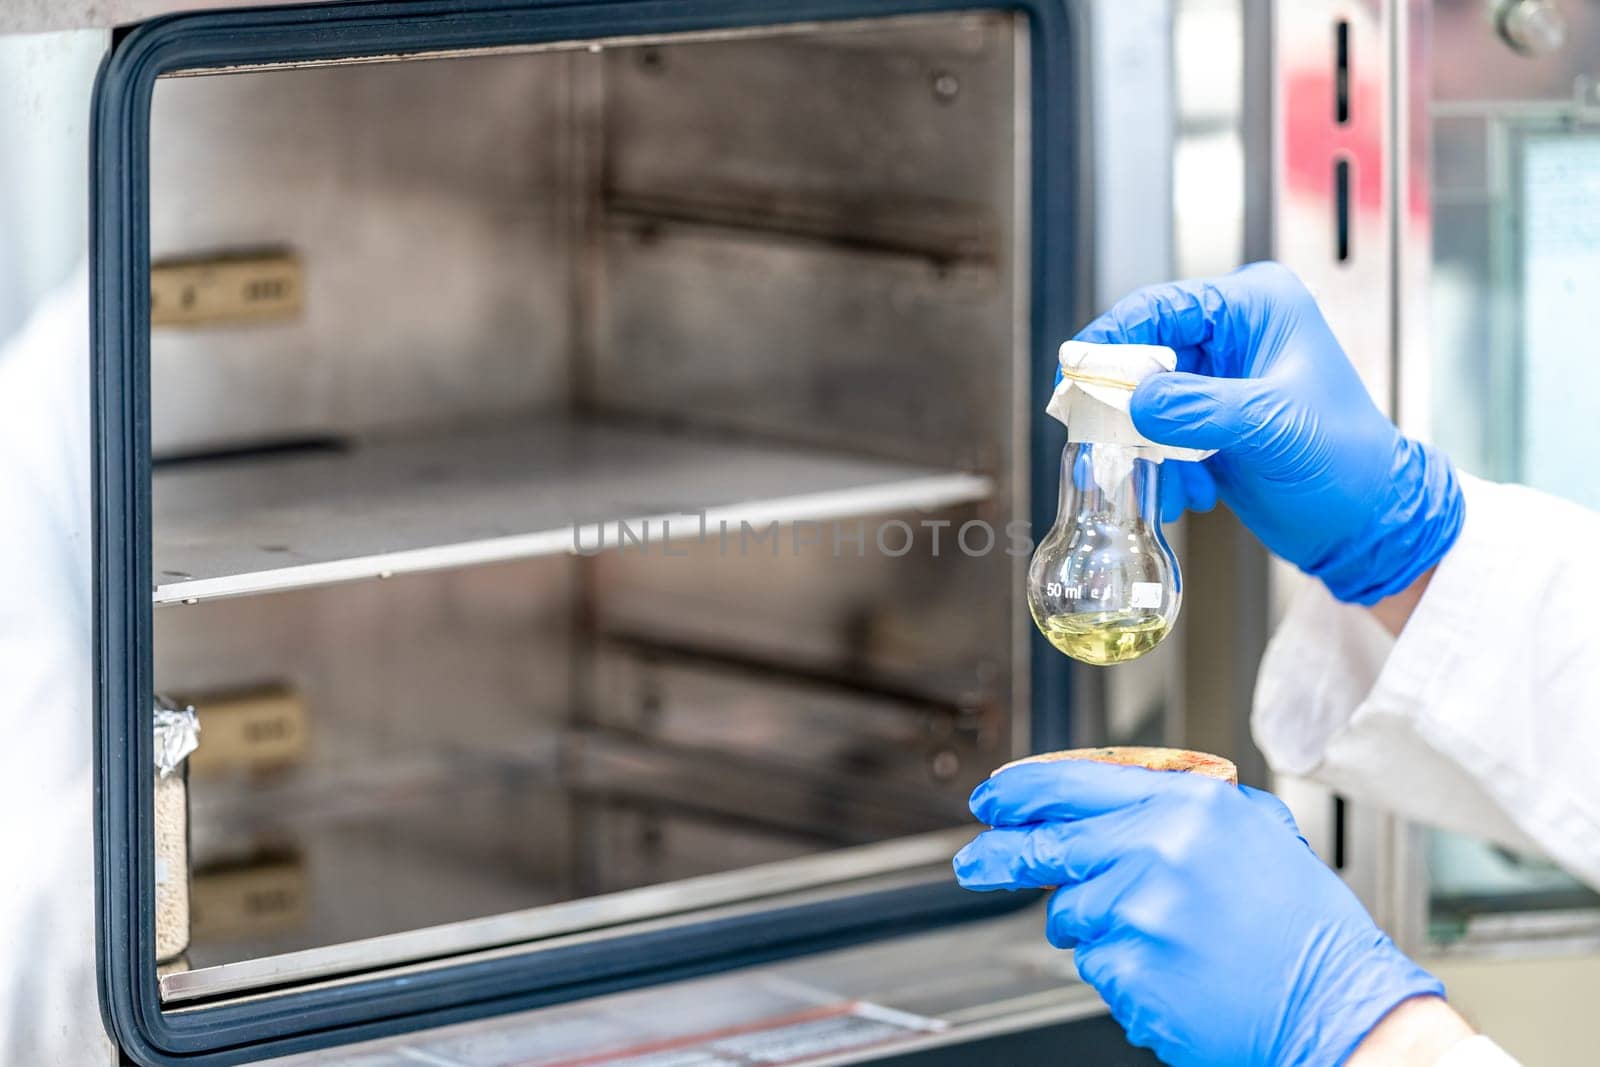 heating a chemical sample in a furnace in a research scientific laboratory by Edophoto